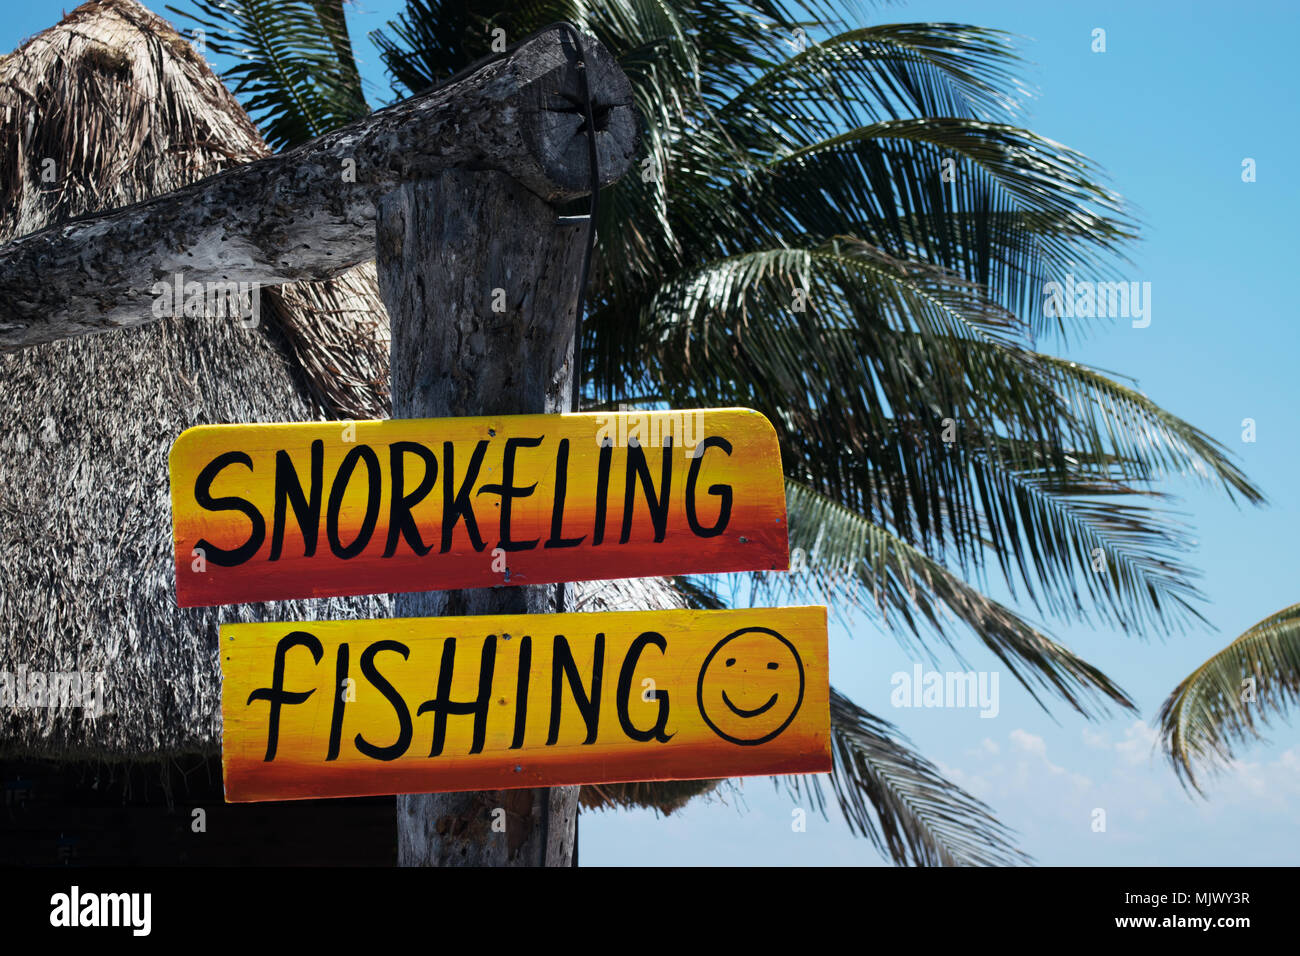 Snorkeling and fishing sign at tropical beach Stock Photo